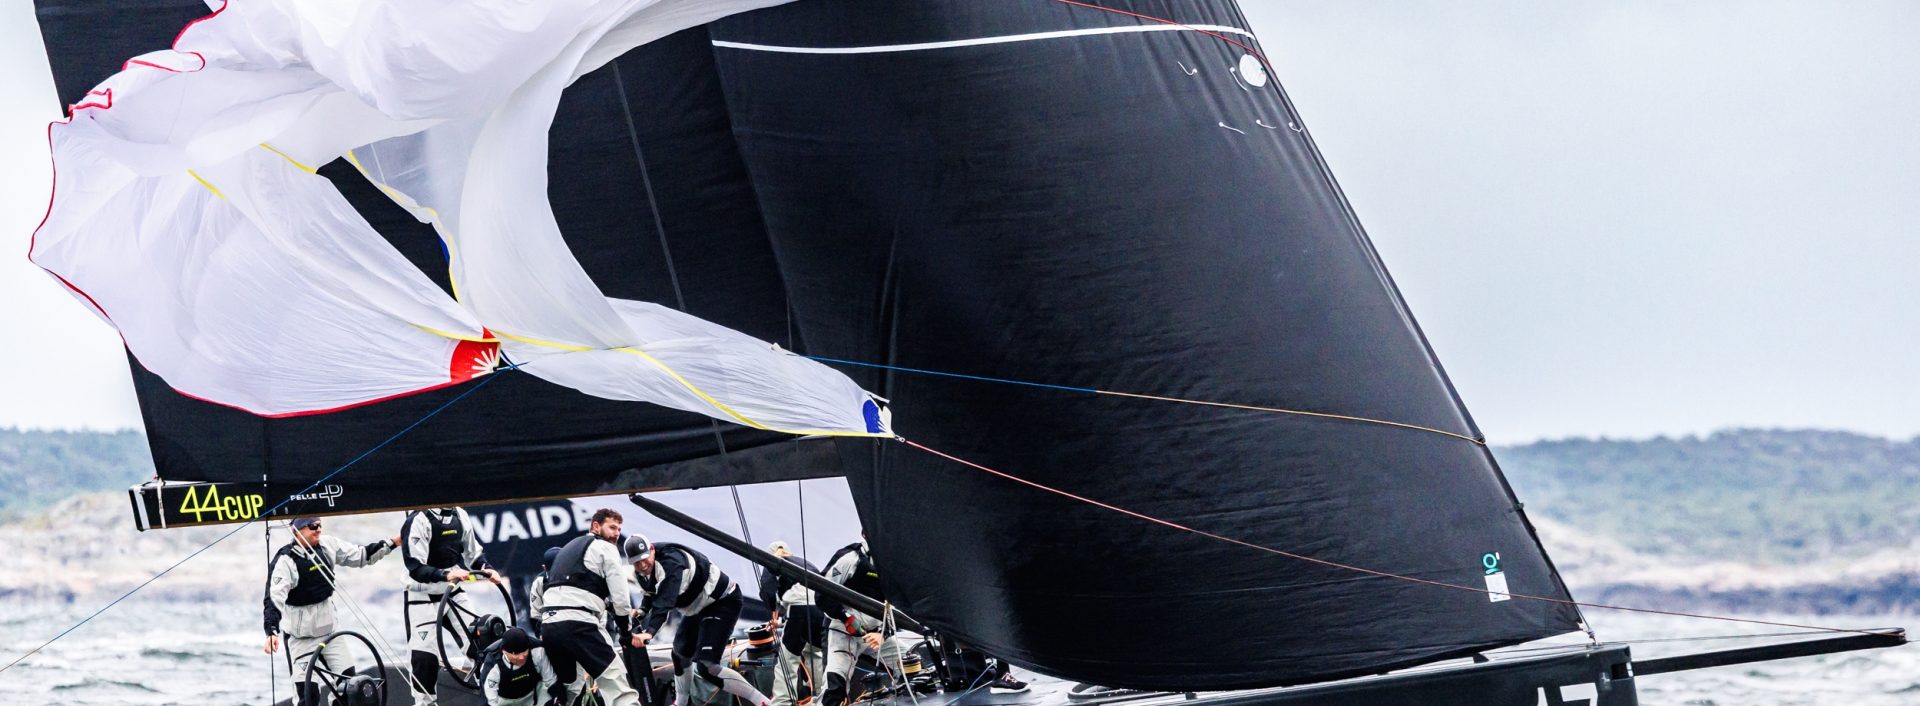 Two horse race going into final day of 44Cup Marstrand